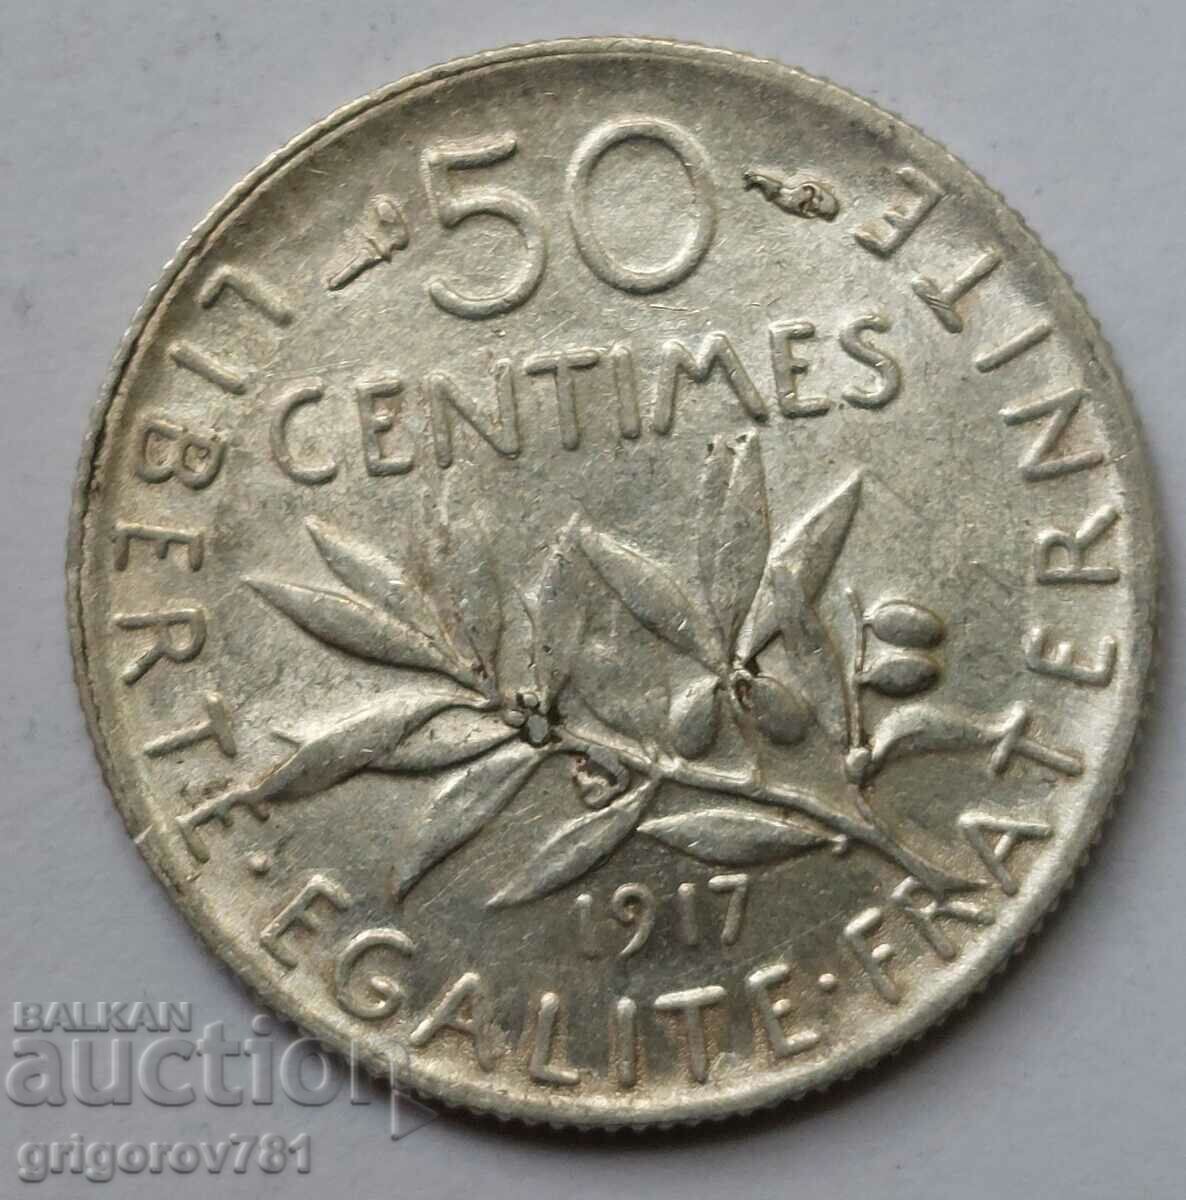 50 centimes silver France 1917 - silver coin #25